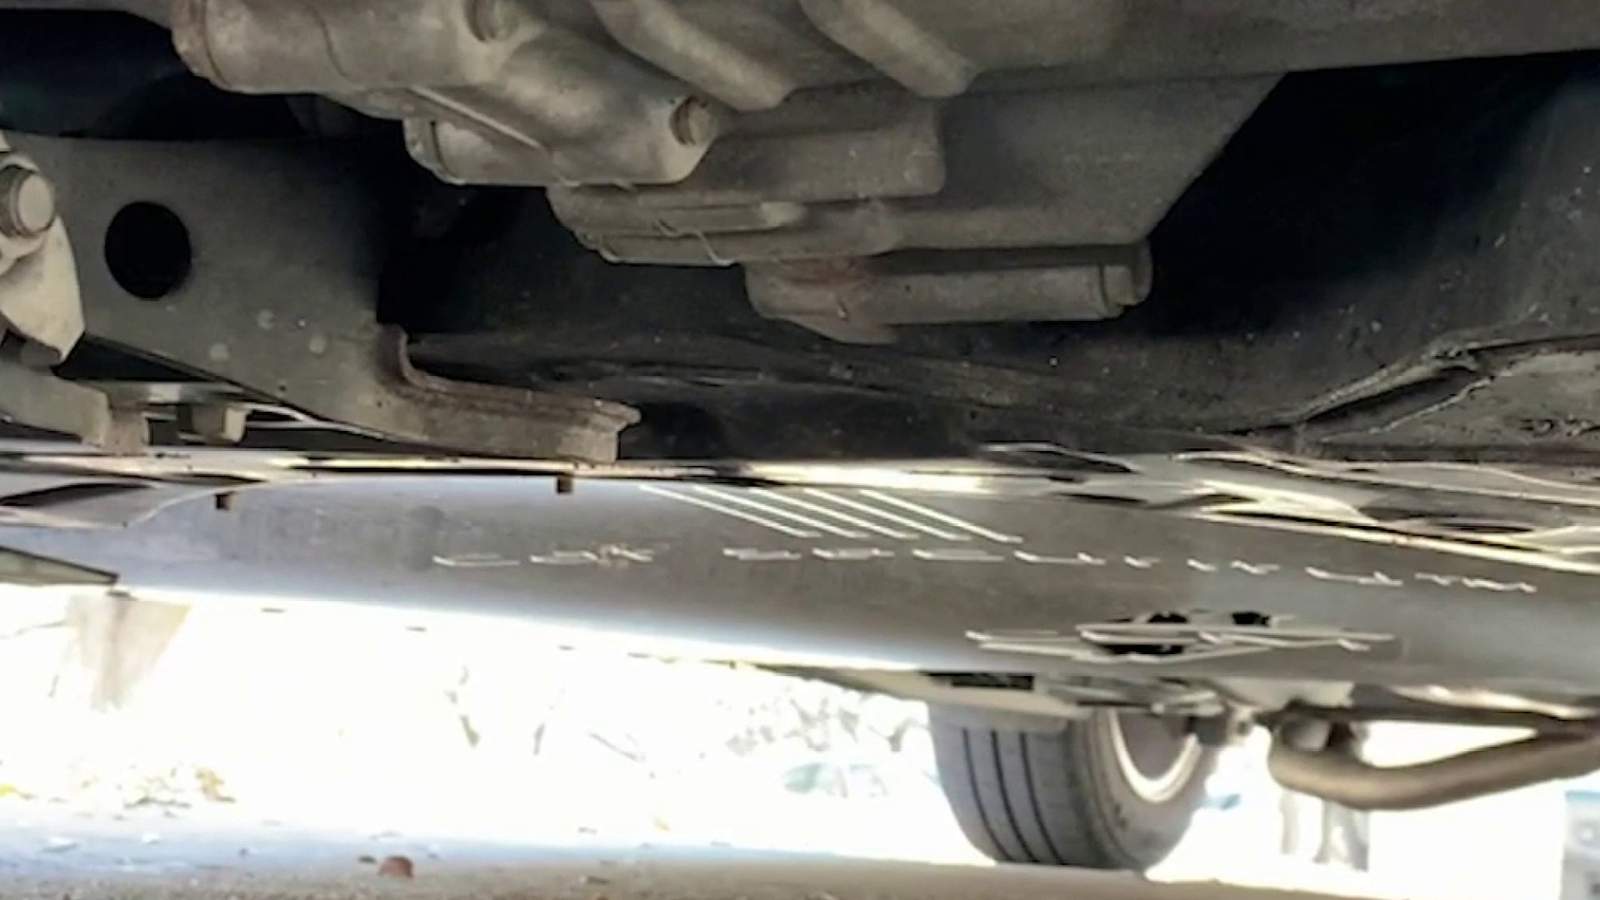 How to stall catalytic converter thieves to avoid shelling out hundreds of dollars